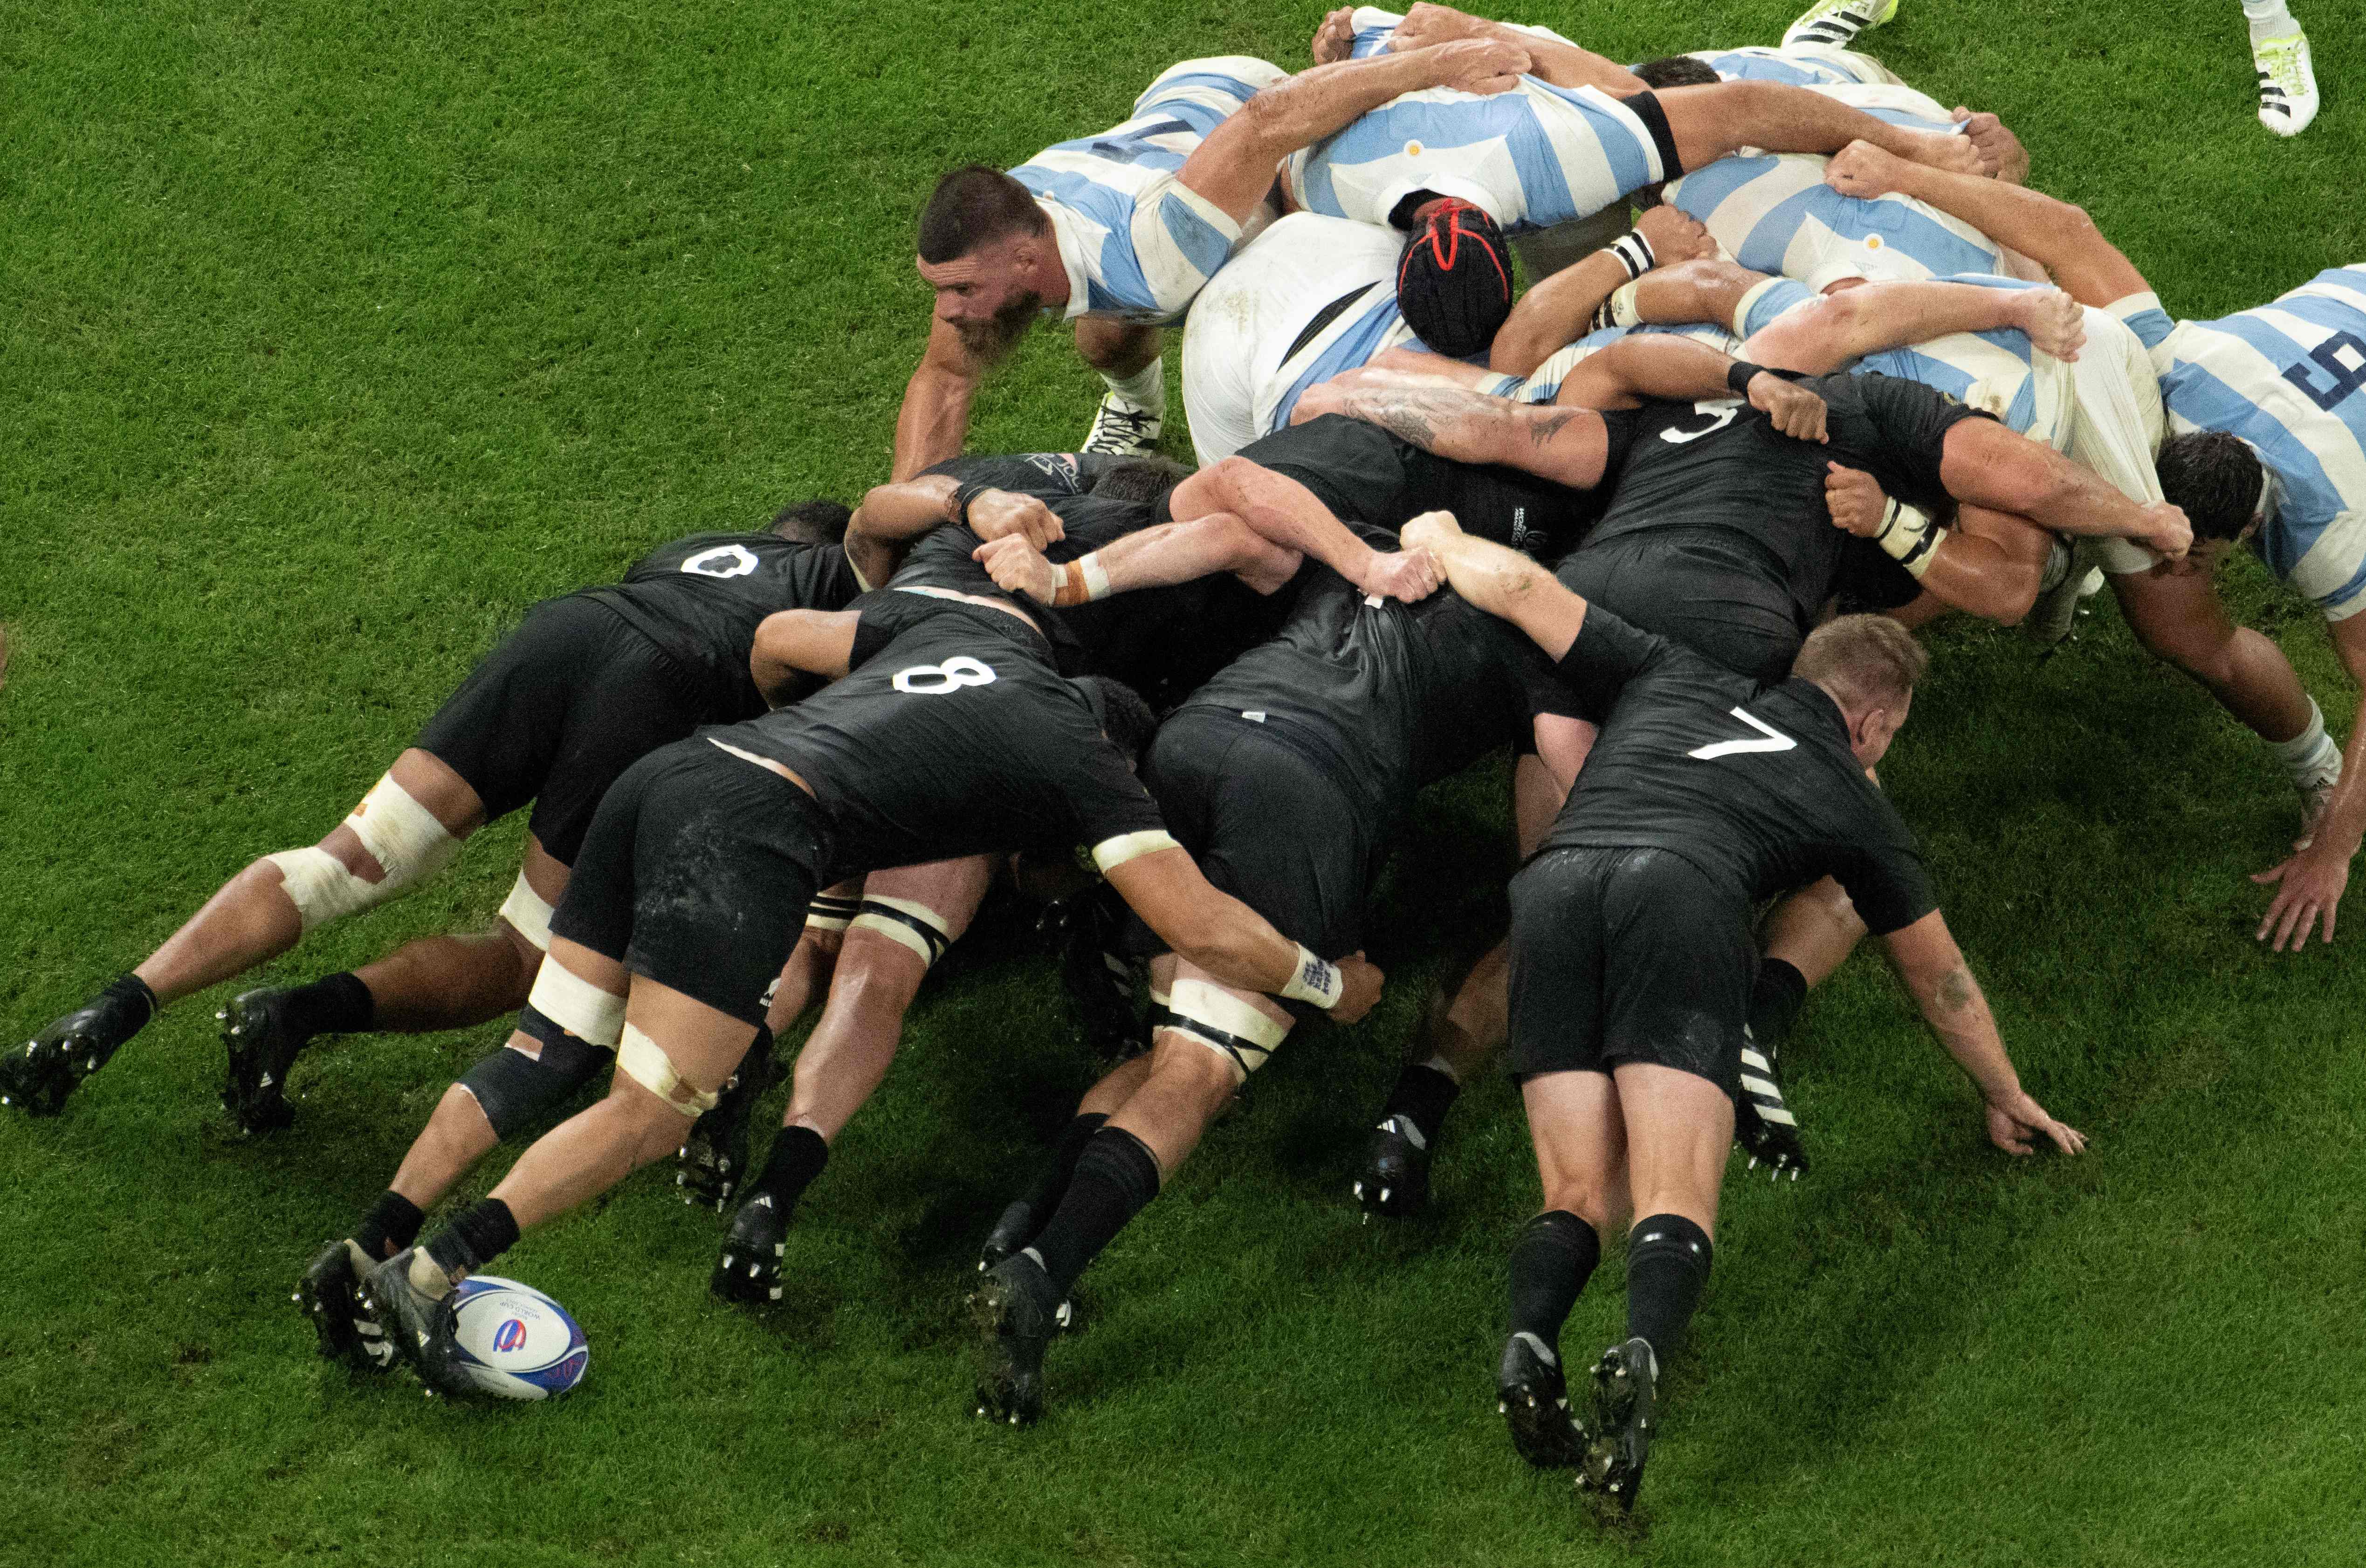 New Zealand’s scrum also proved effective